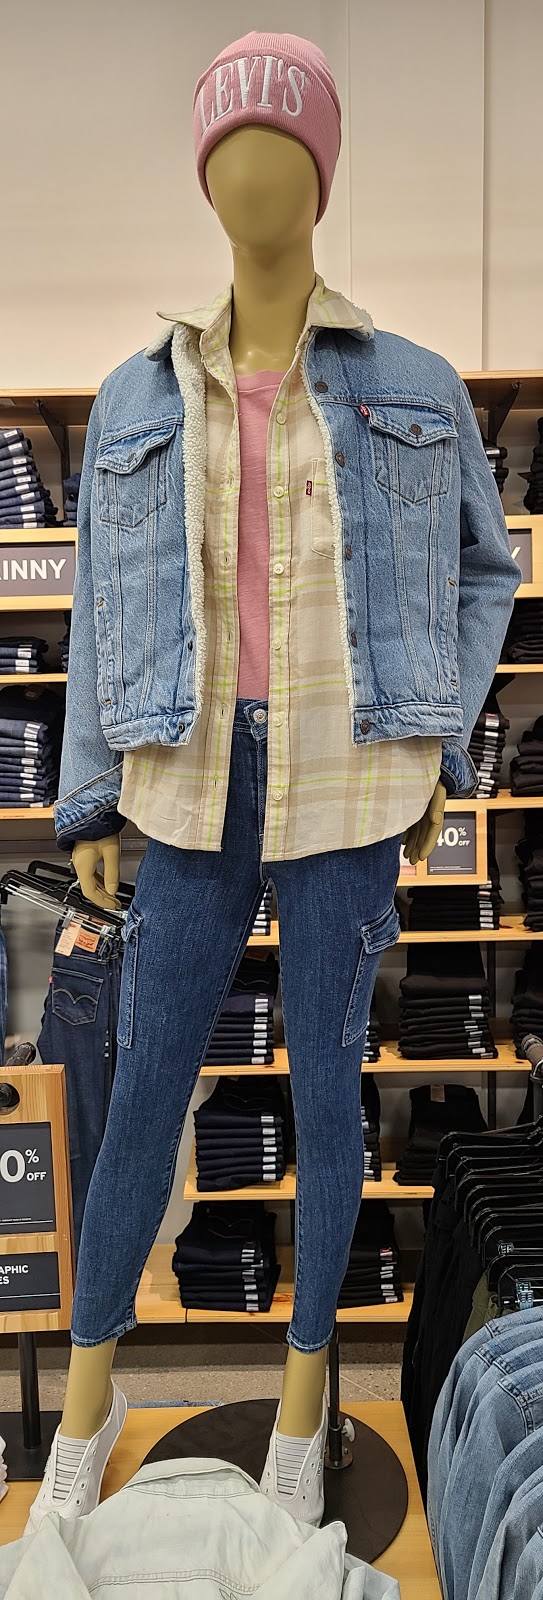 Levis Outlet Store | 300 Taylor Rd, Niagara-on-the-Lake, ON L0S 1J0, Canada | Phone: (289) 270-1938